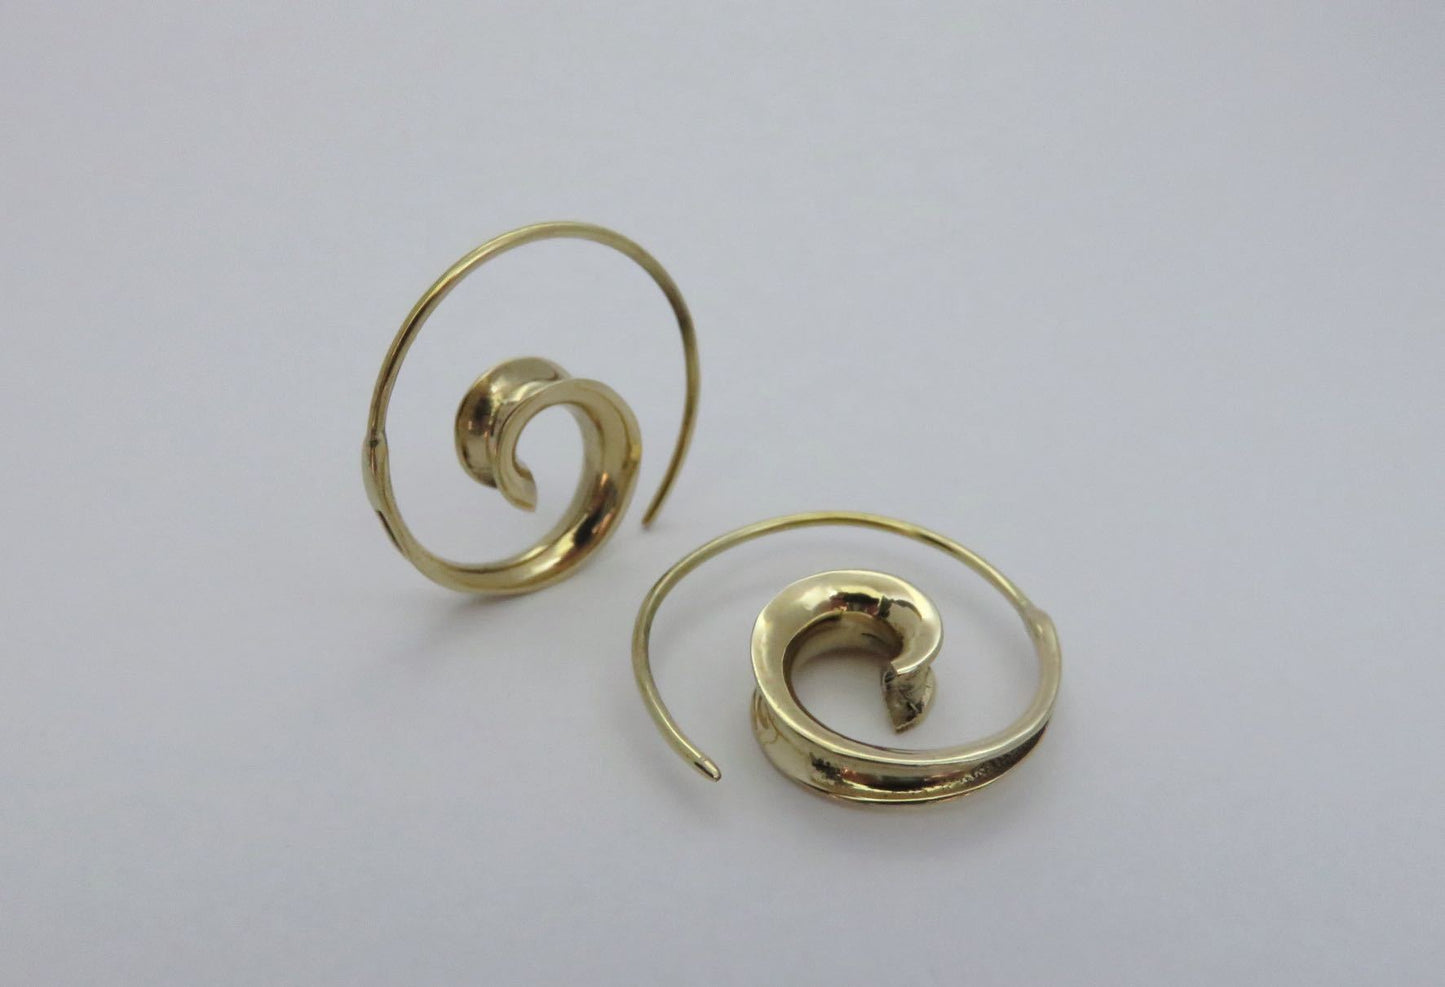 small simple spiral earrings made of brass 